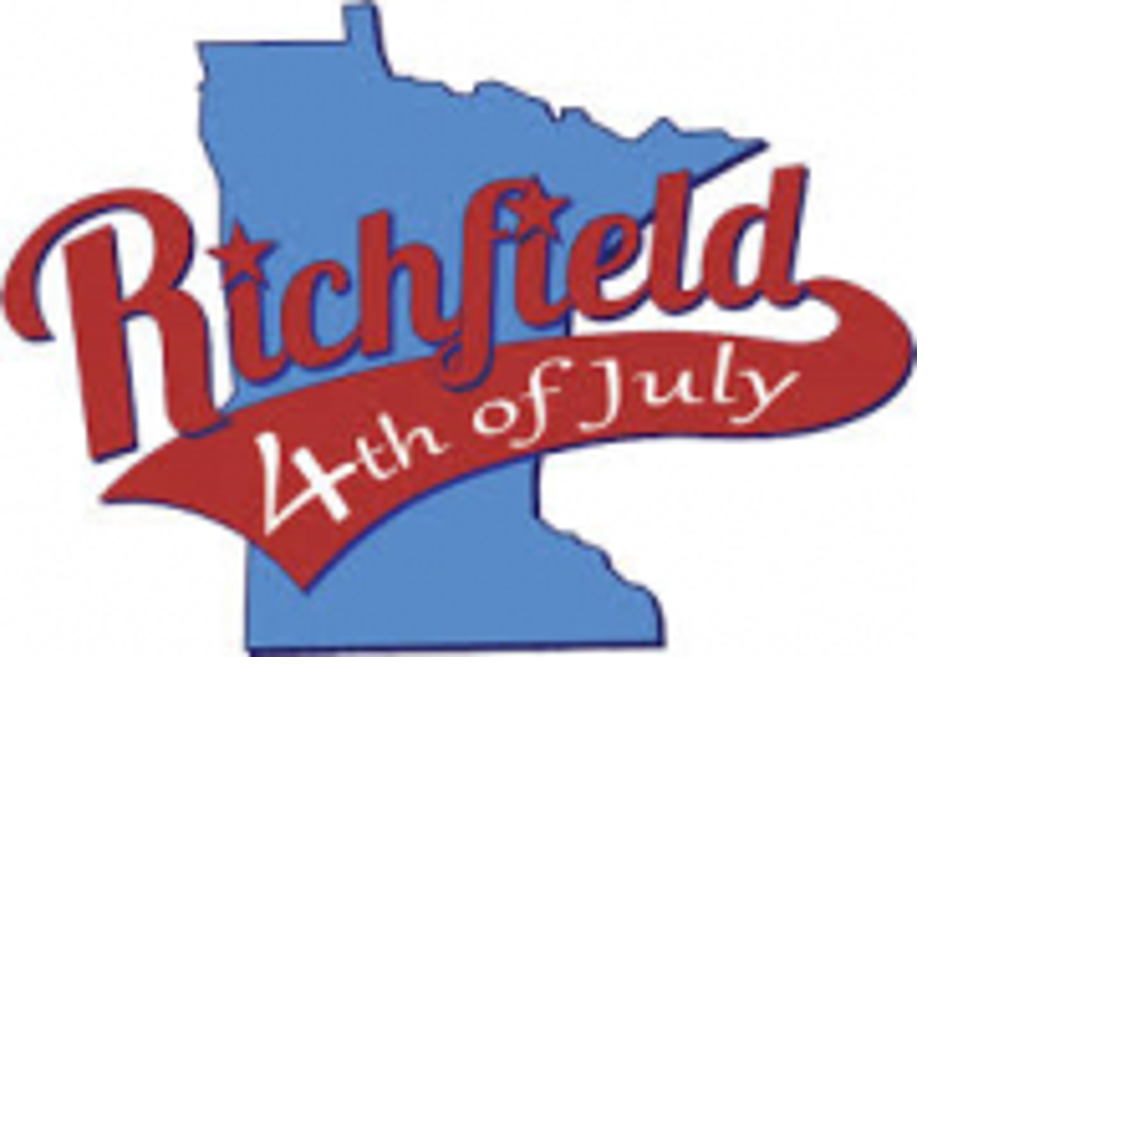 Richfield 4th of July Committee, Inc. GiveMN